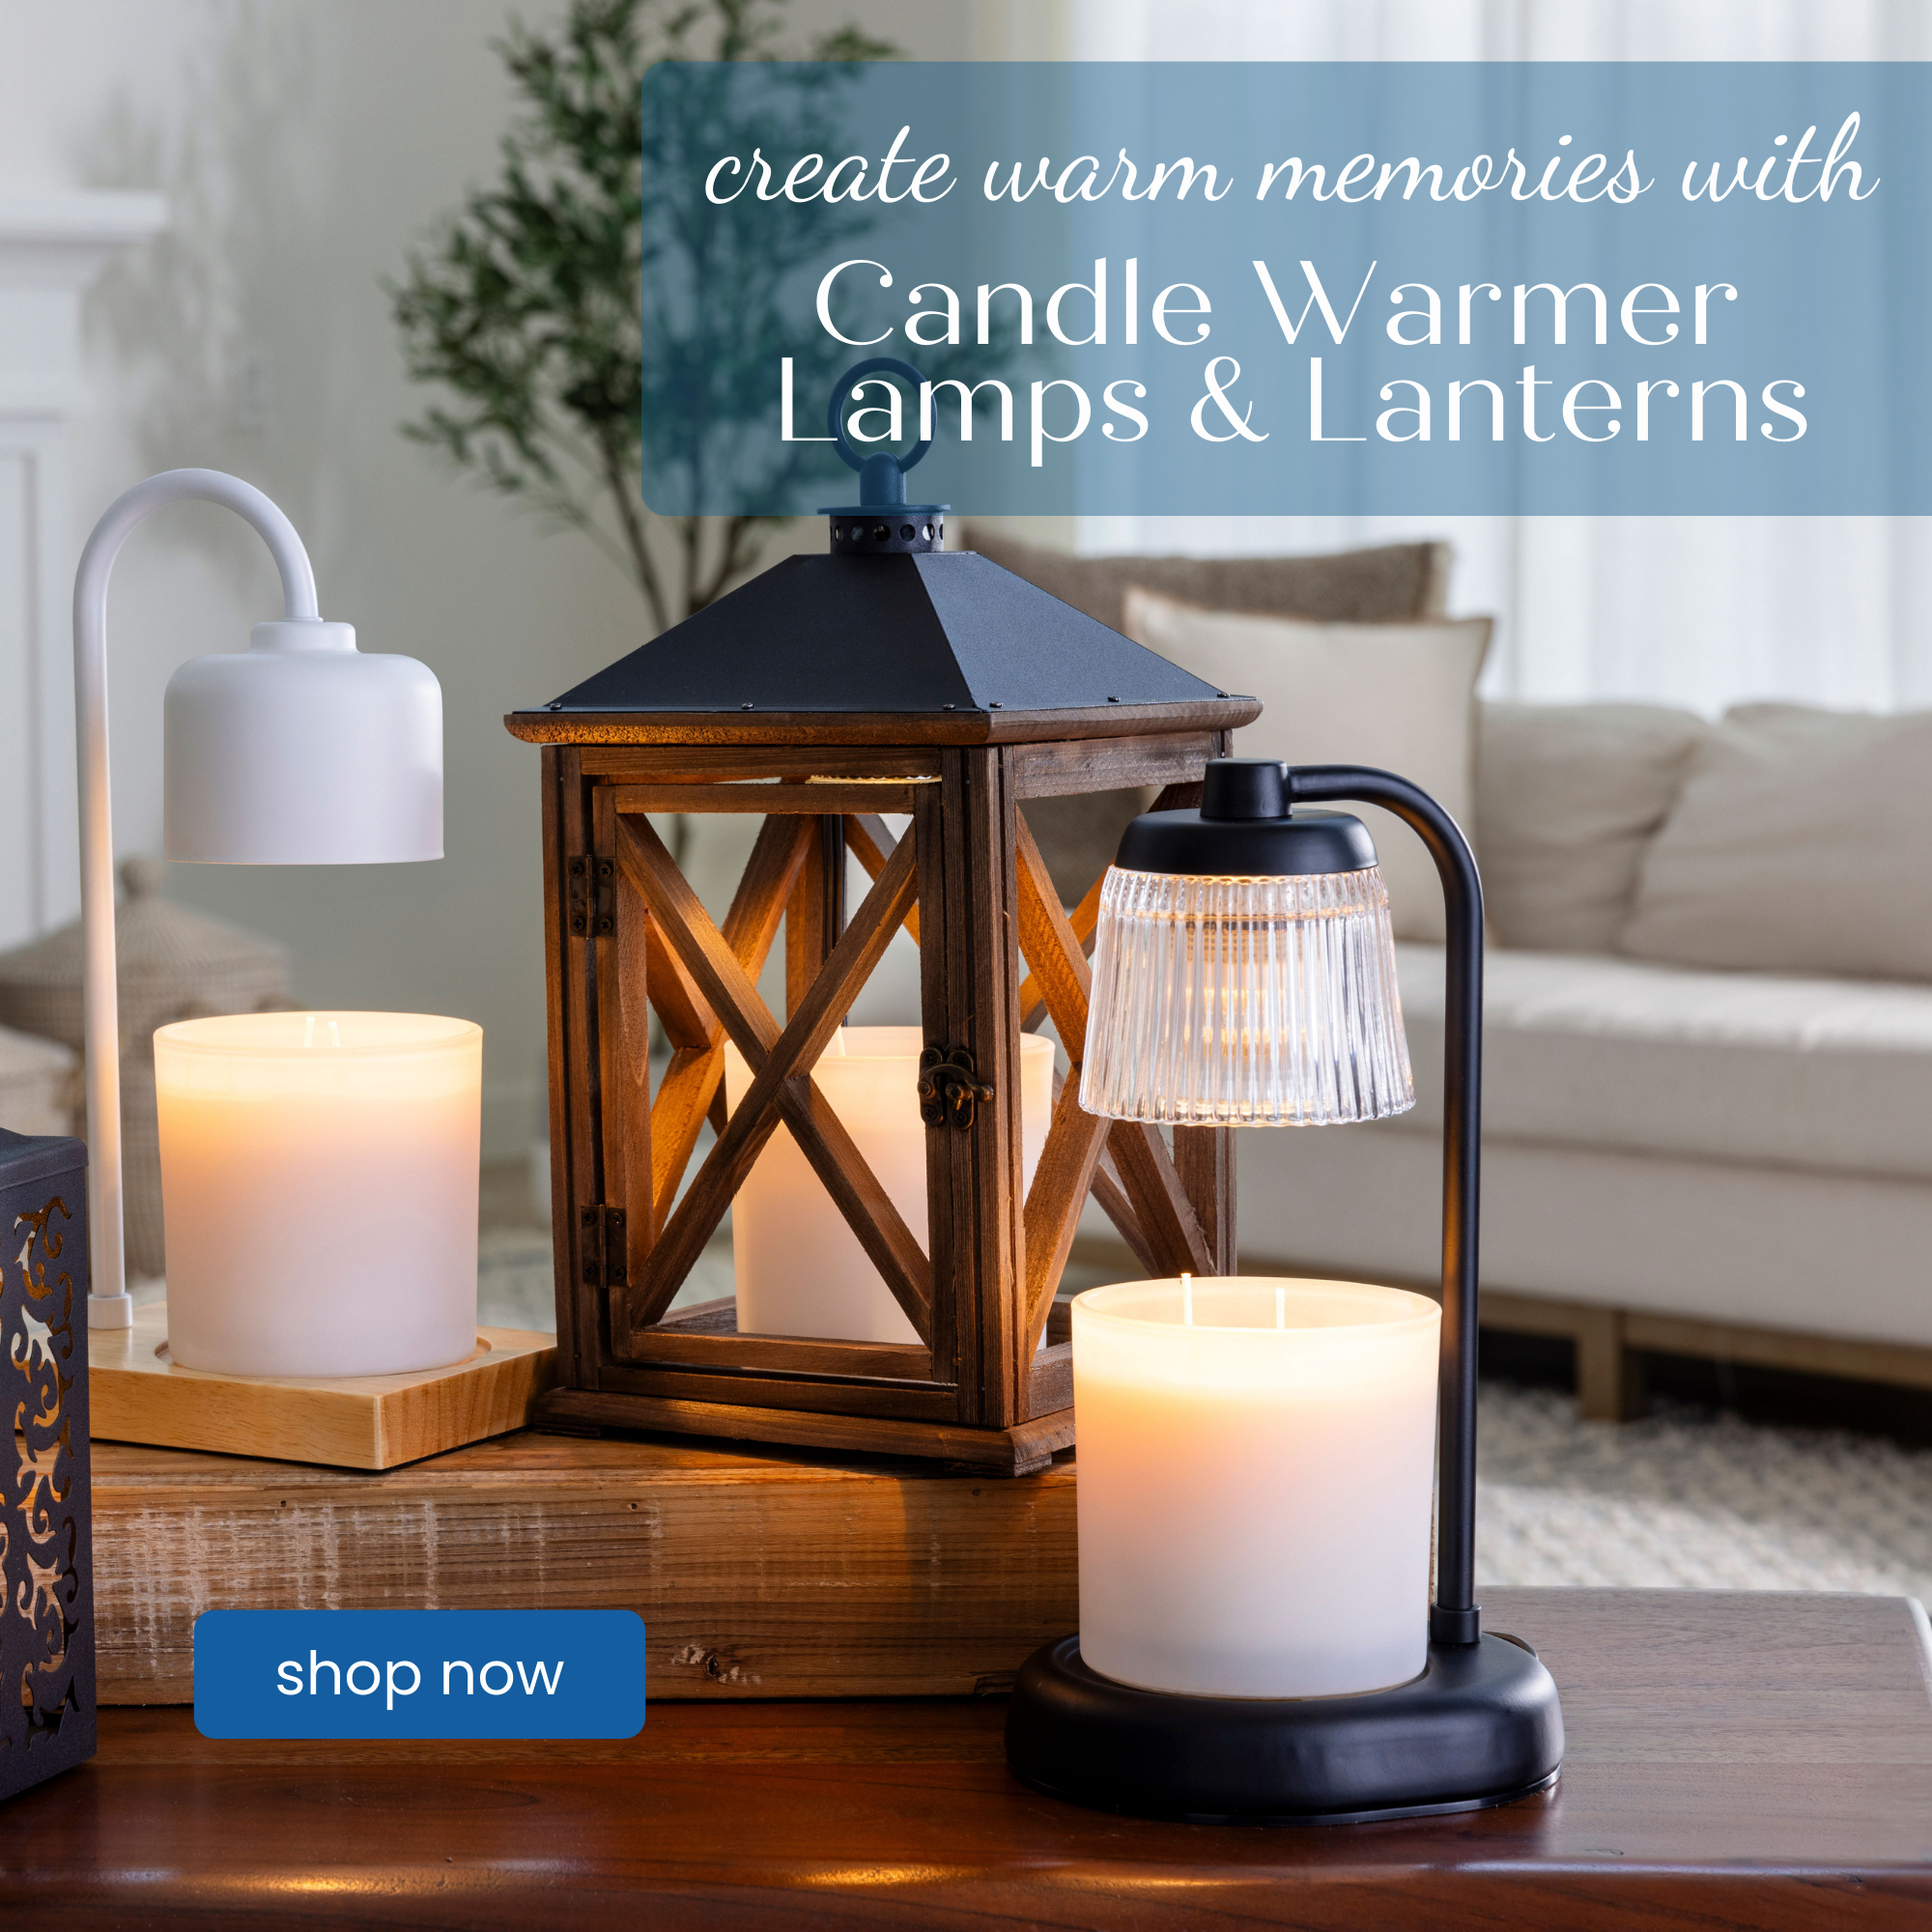 Candle Warmers Etc.  Shop our Wax Melts, and Candle Warmers